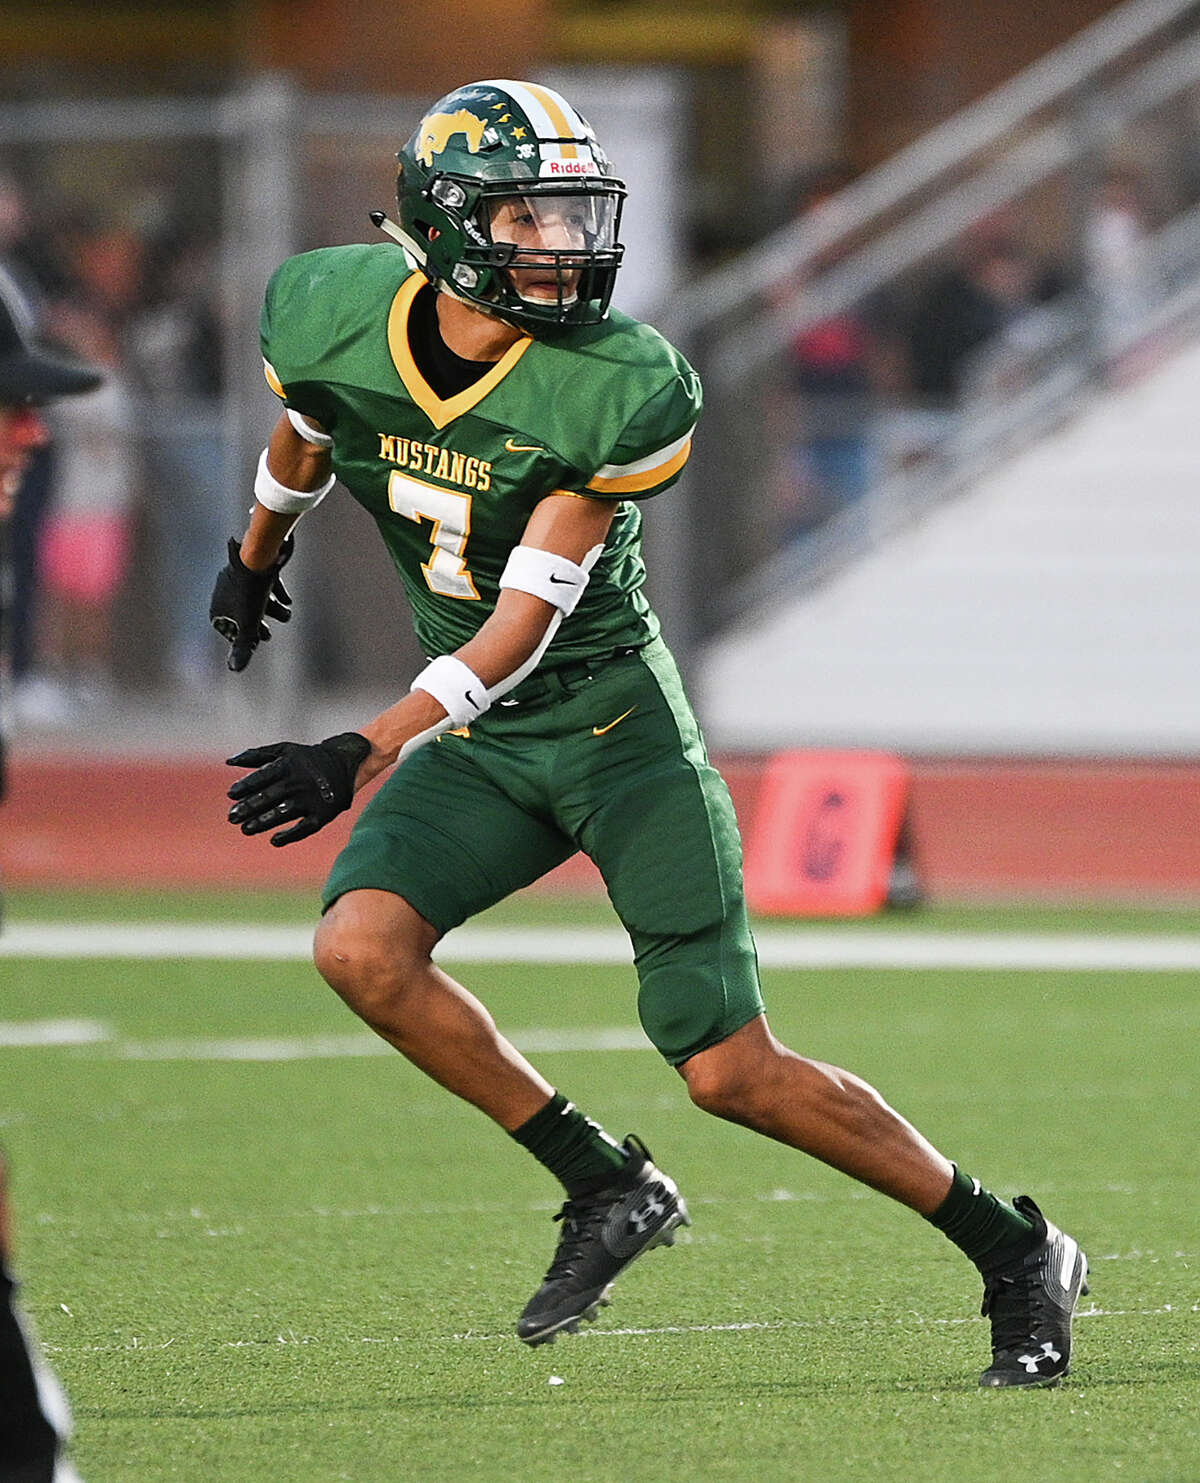 Nixon High School football player Alexis Aldana plays during a game against United South High School, Thursday, Sept. 30, 2021 at Shirley Field.